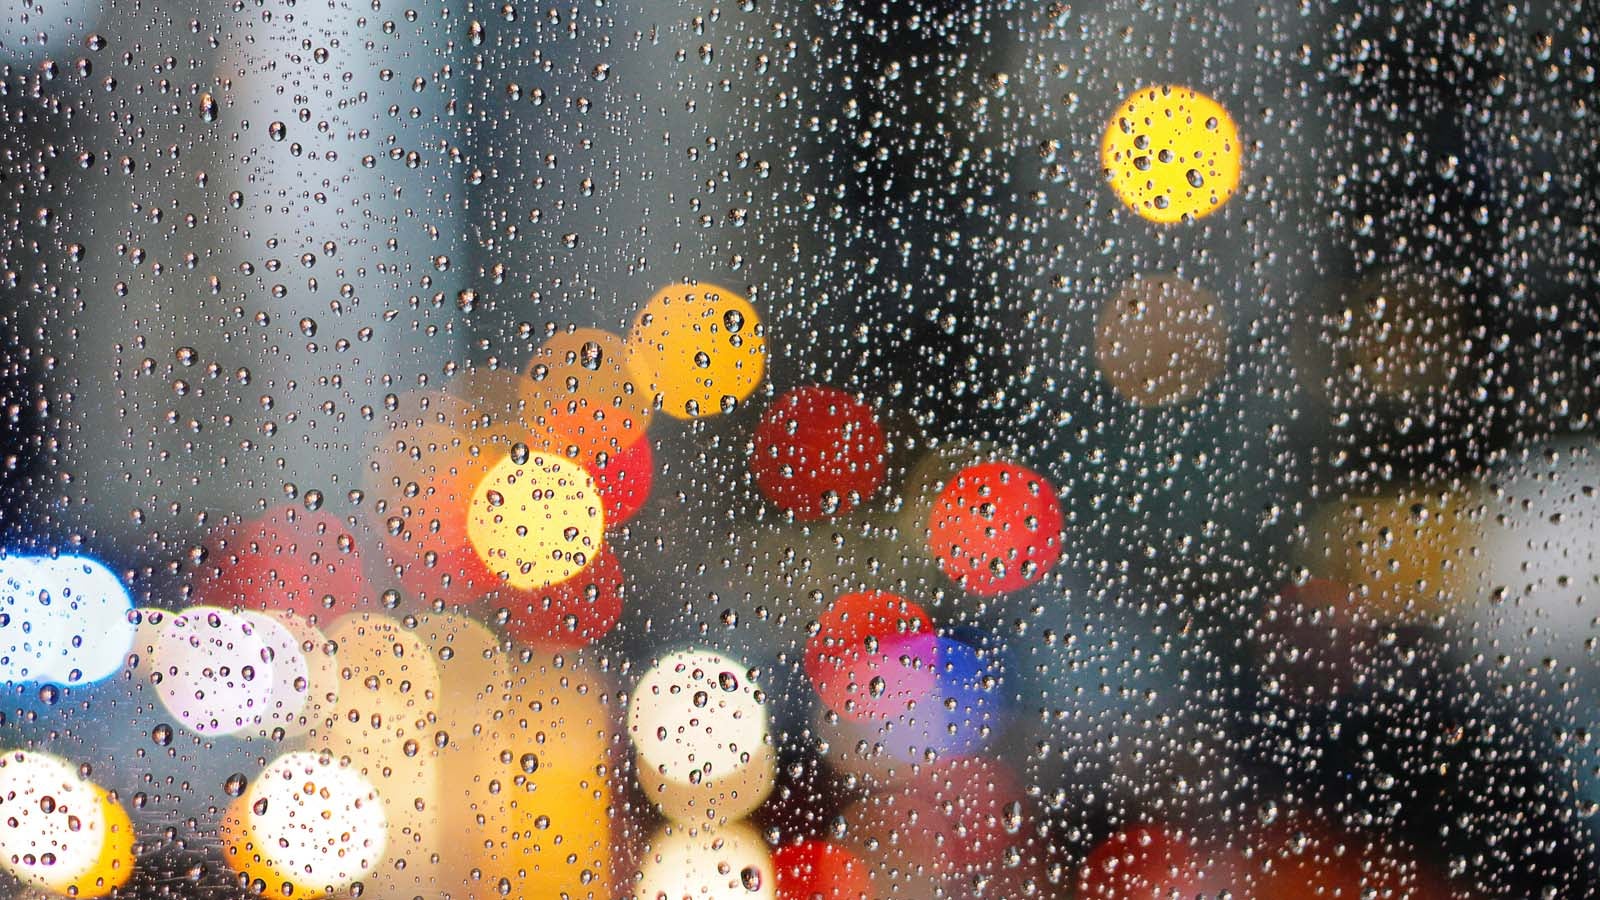 window with water droplets and blurred city lights